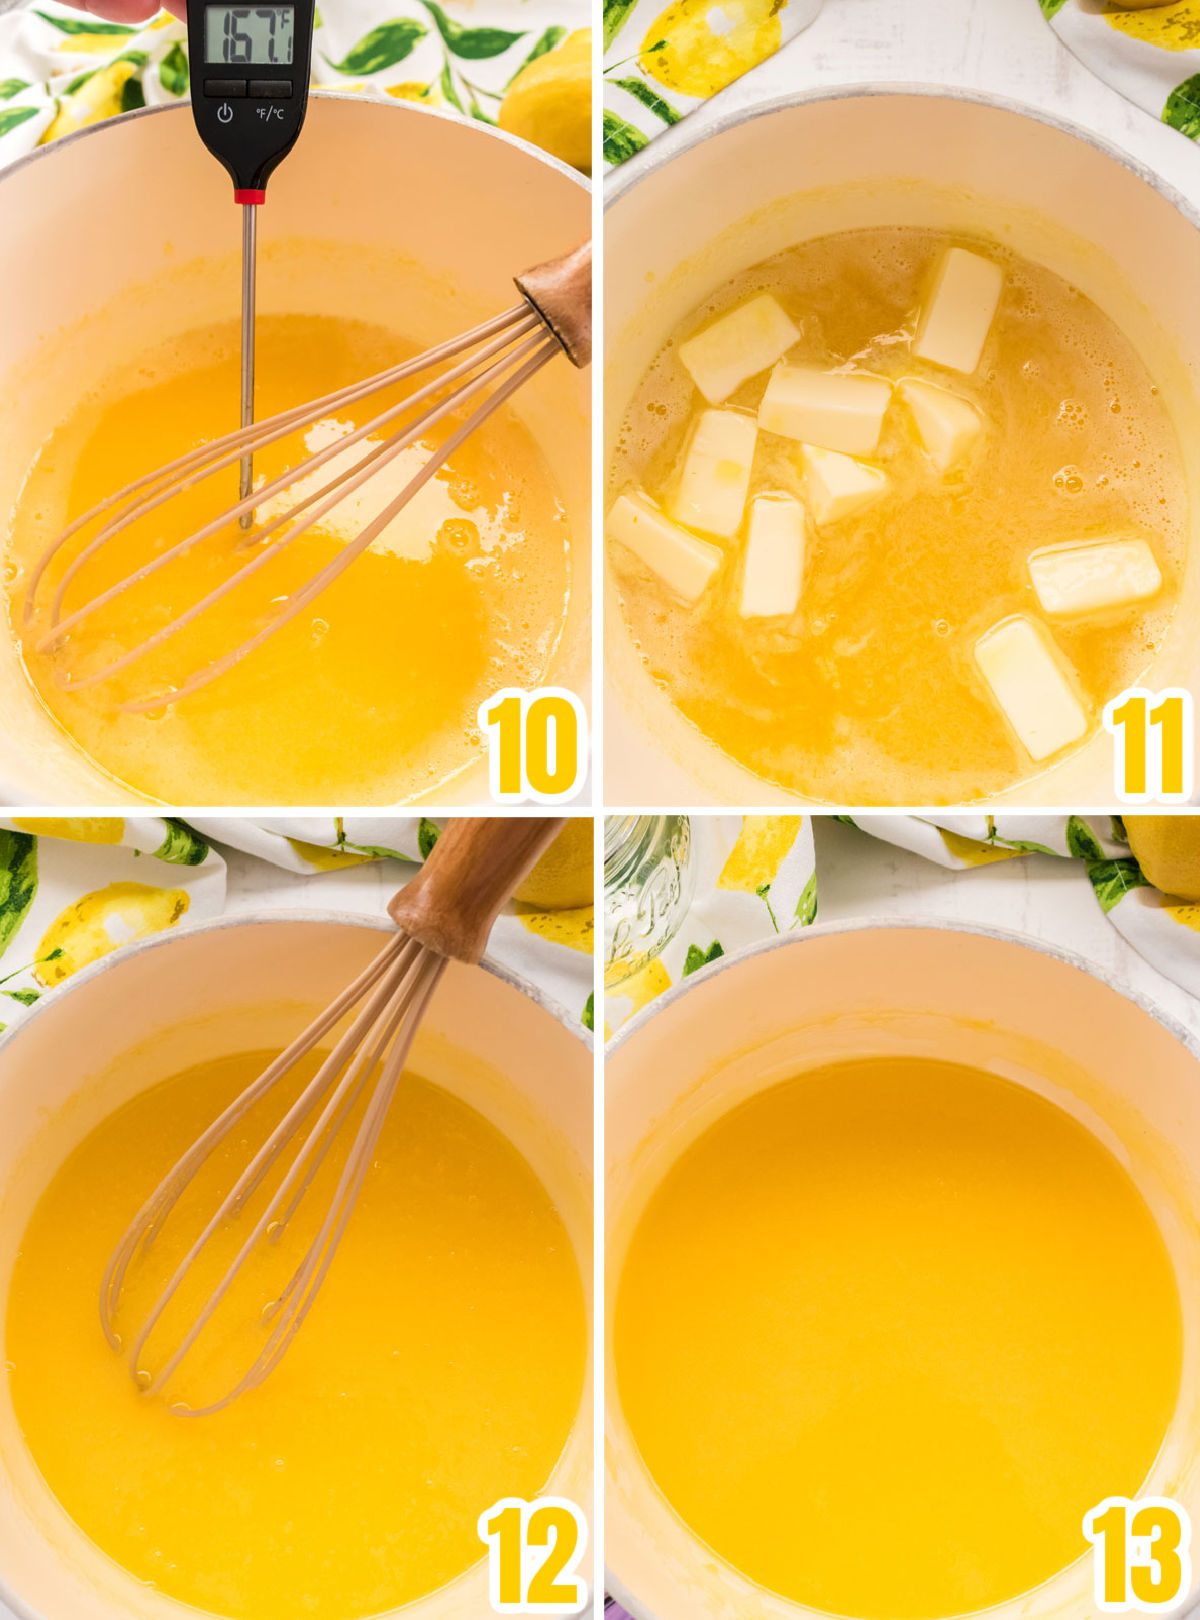 Collage image showing the steps for cooking lemon curd in a sauce pan on a stove.